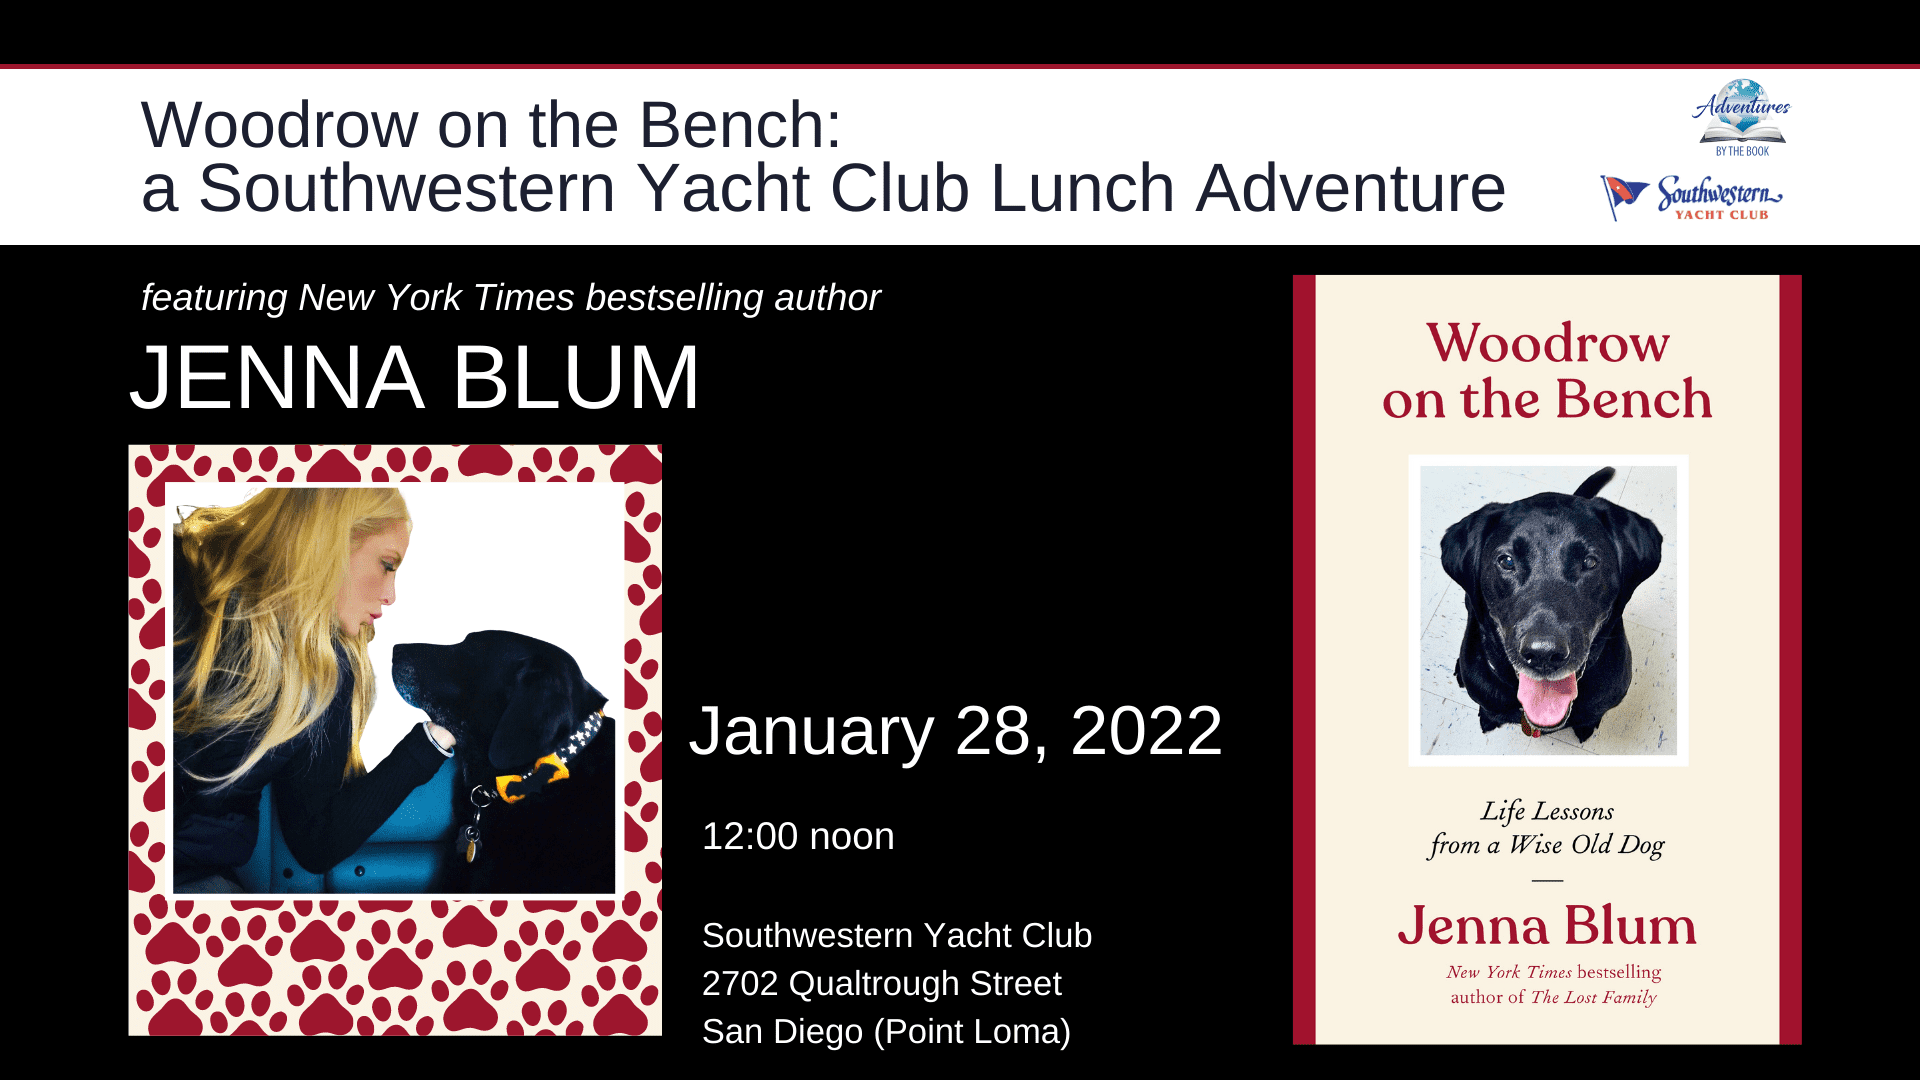 Woodrow on the Bench: A Southwestern Yacht Club Lunch Adventure with NYT Bestselling Author Jenna Blum